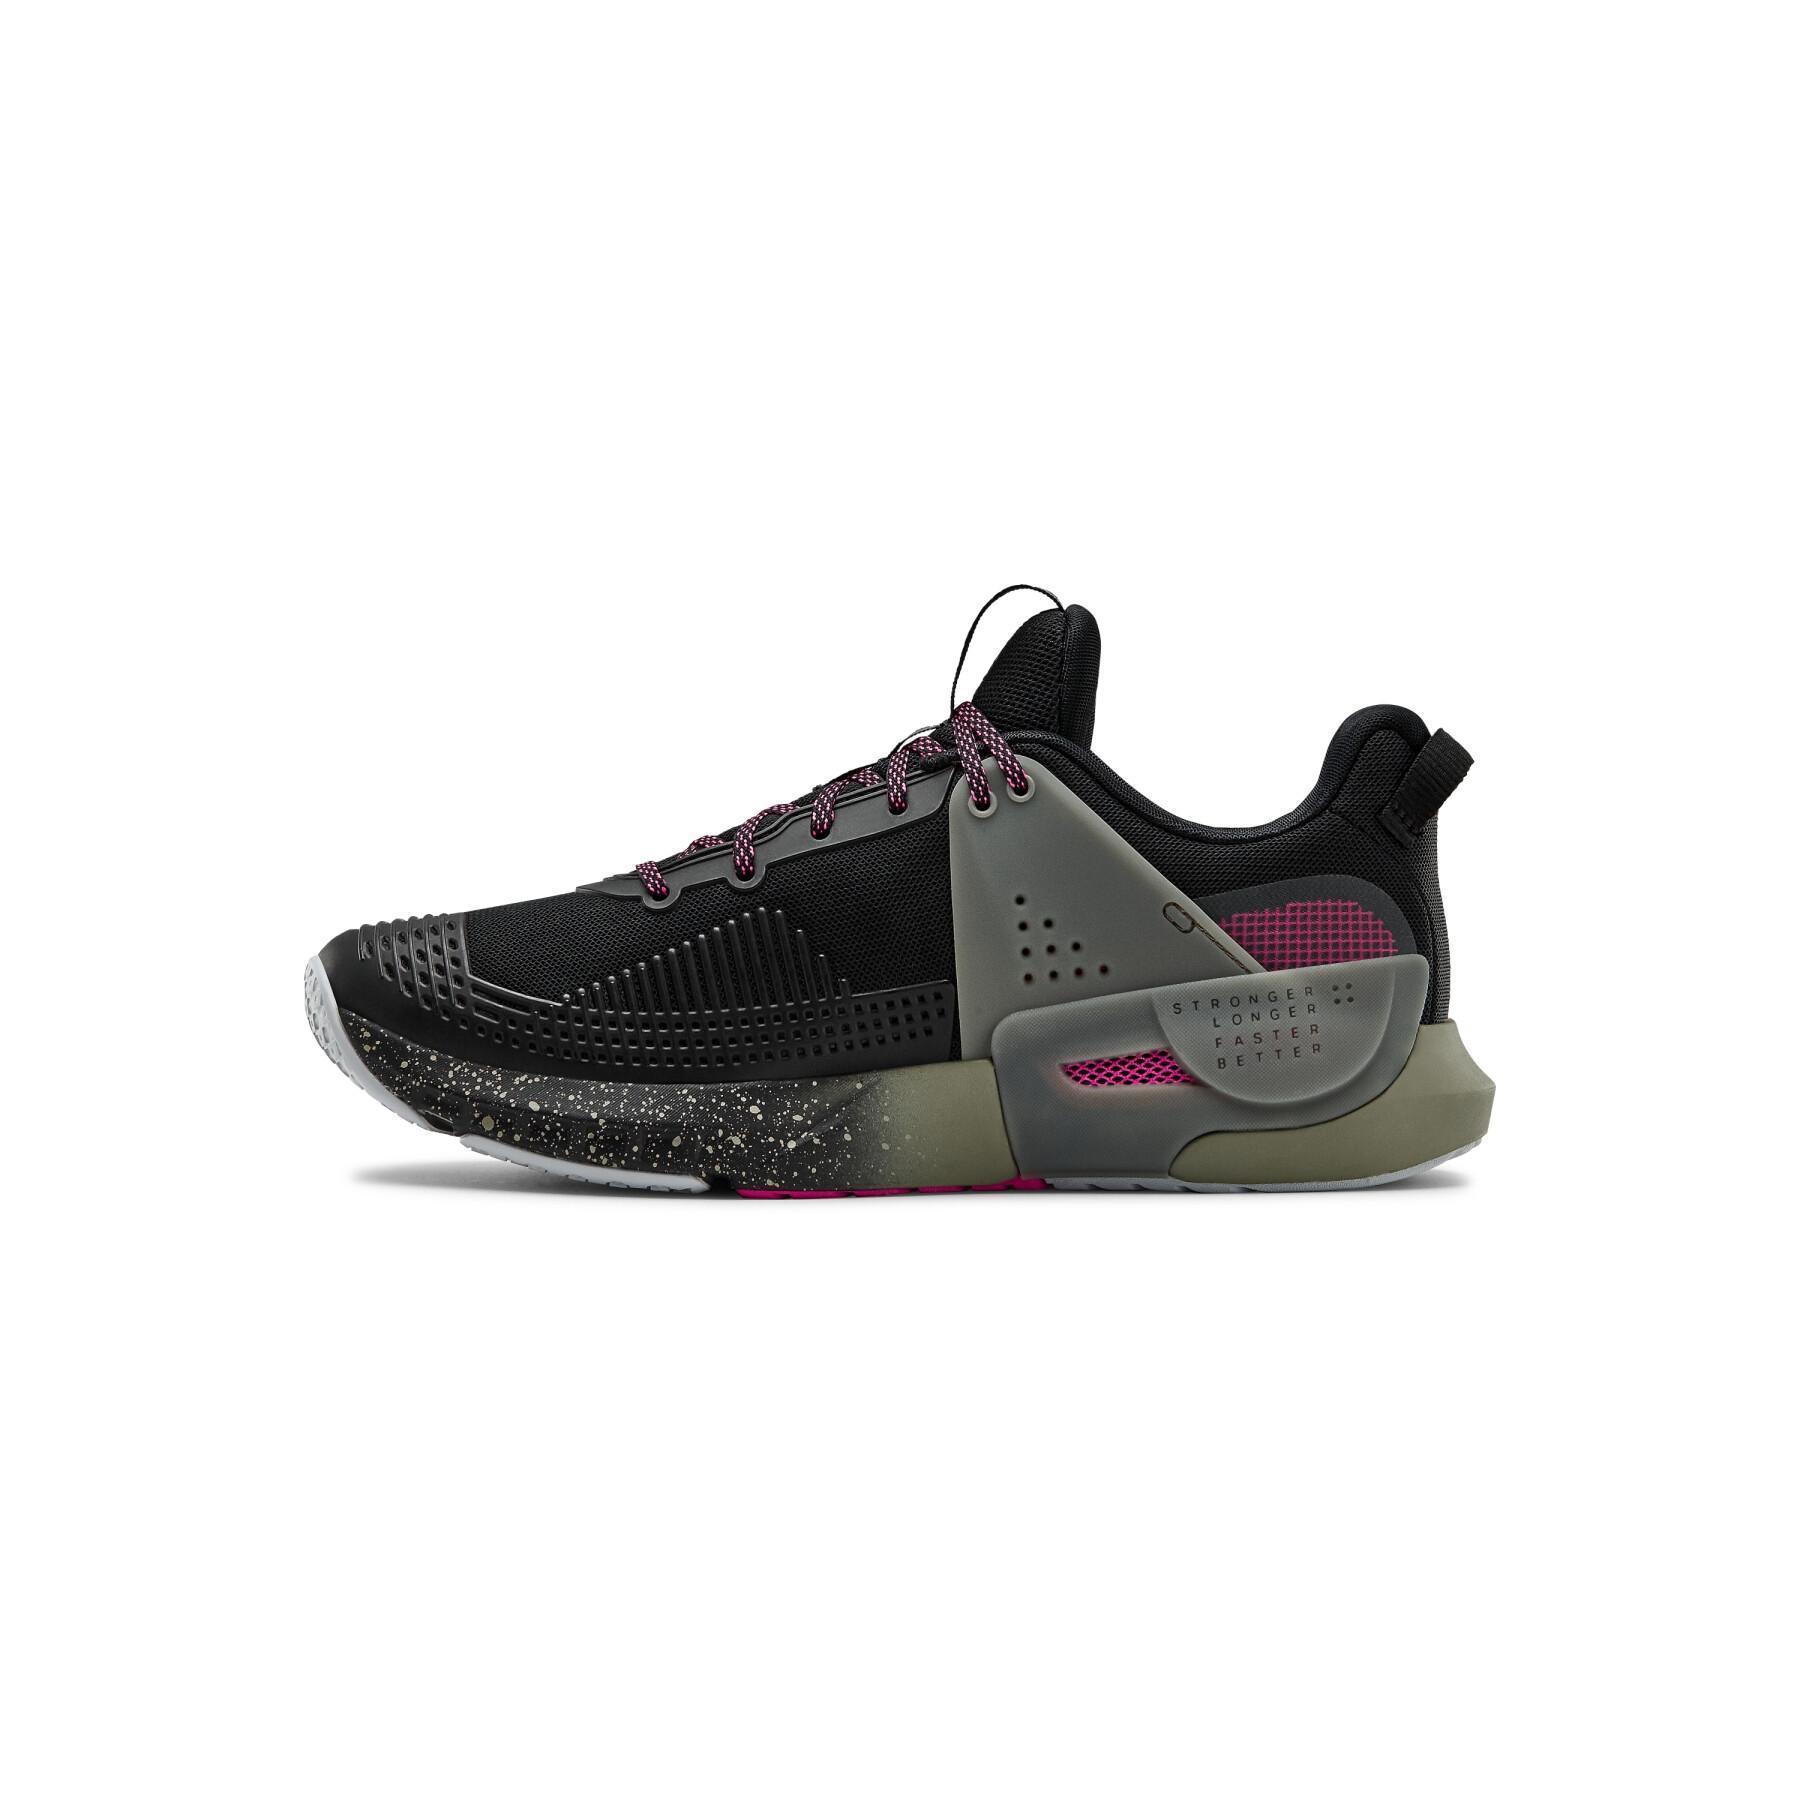 Shoes Under Armour HOVR™ Apex